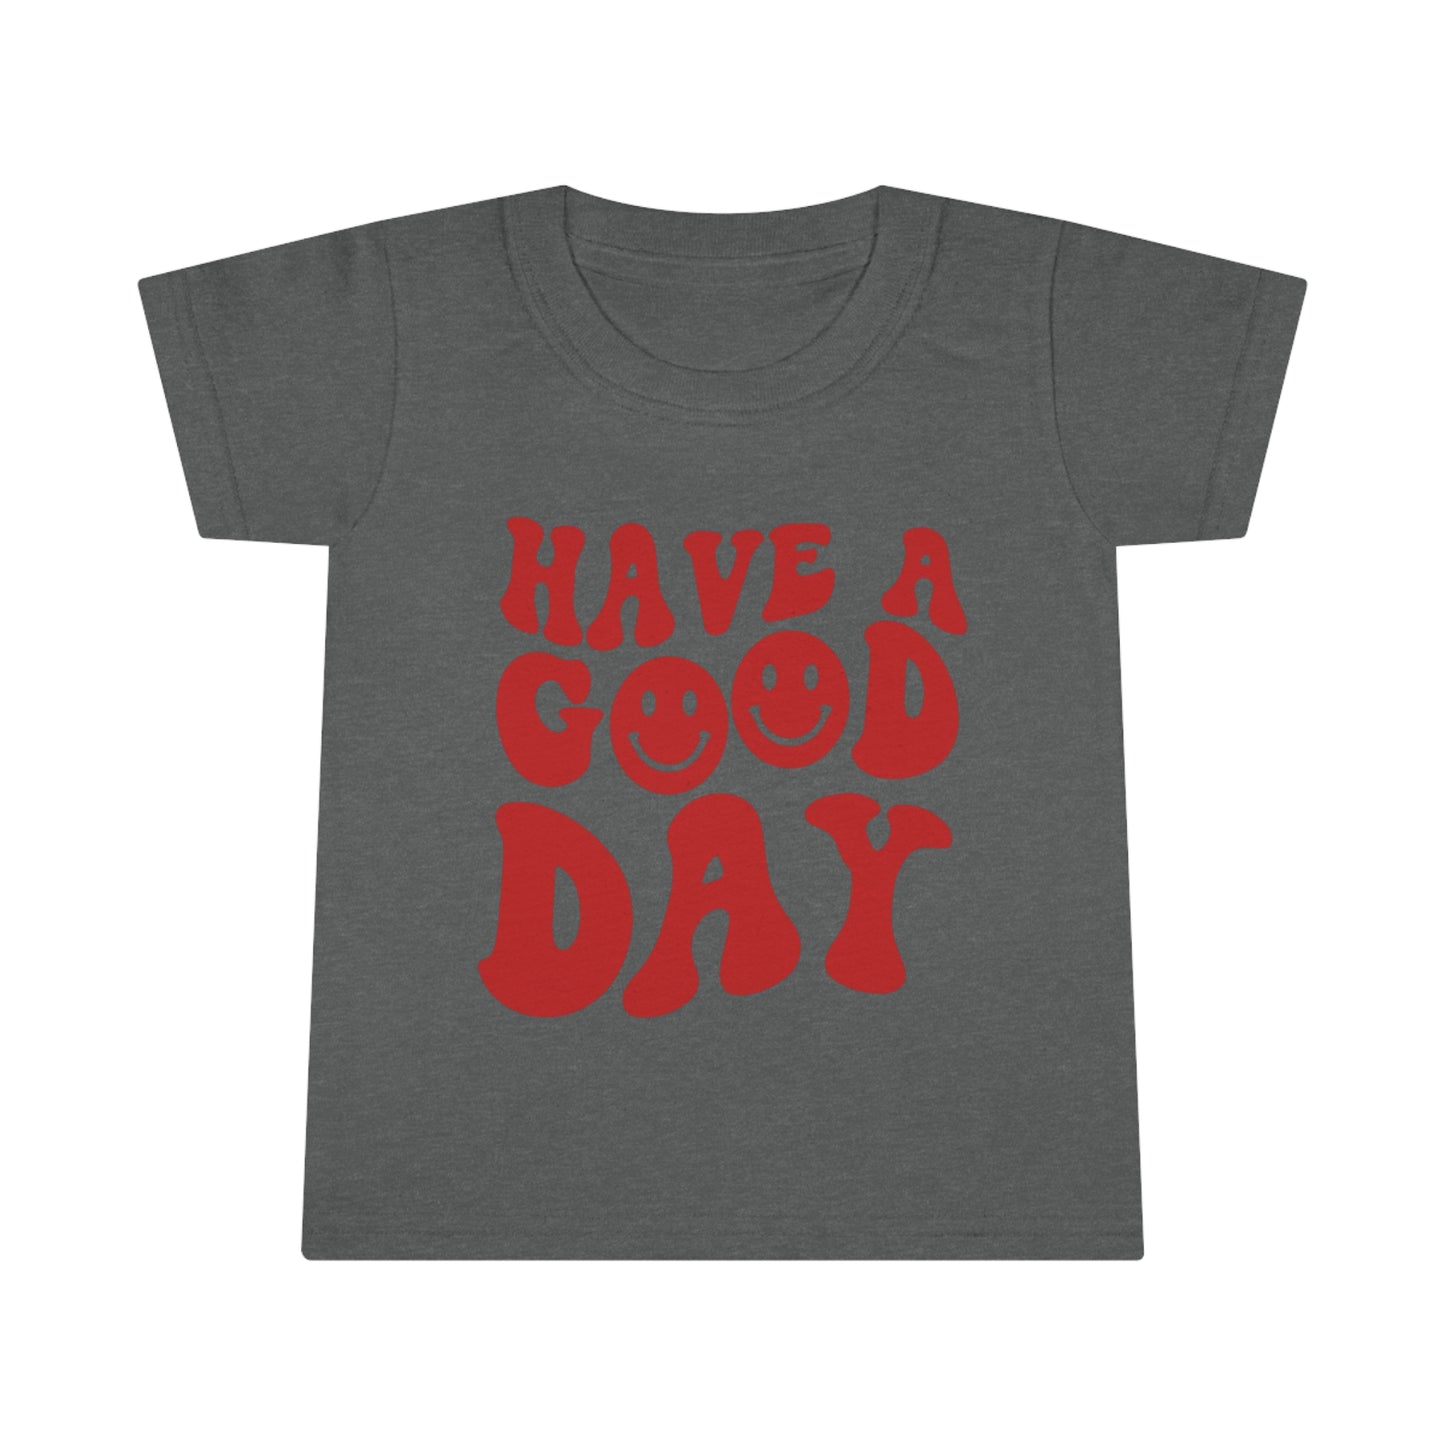 Have a Good Day - Toddler T-shirt